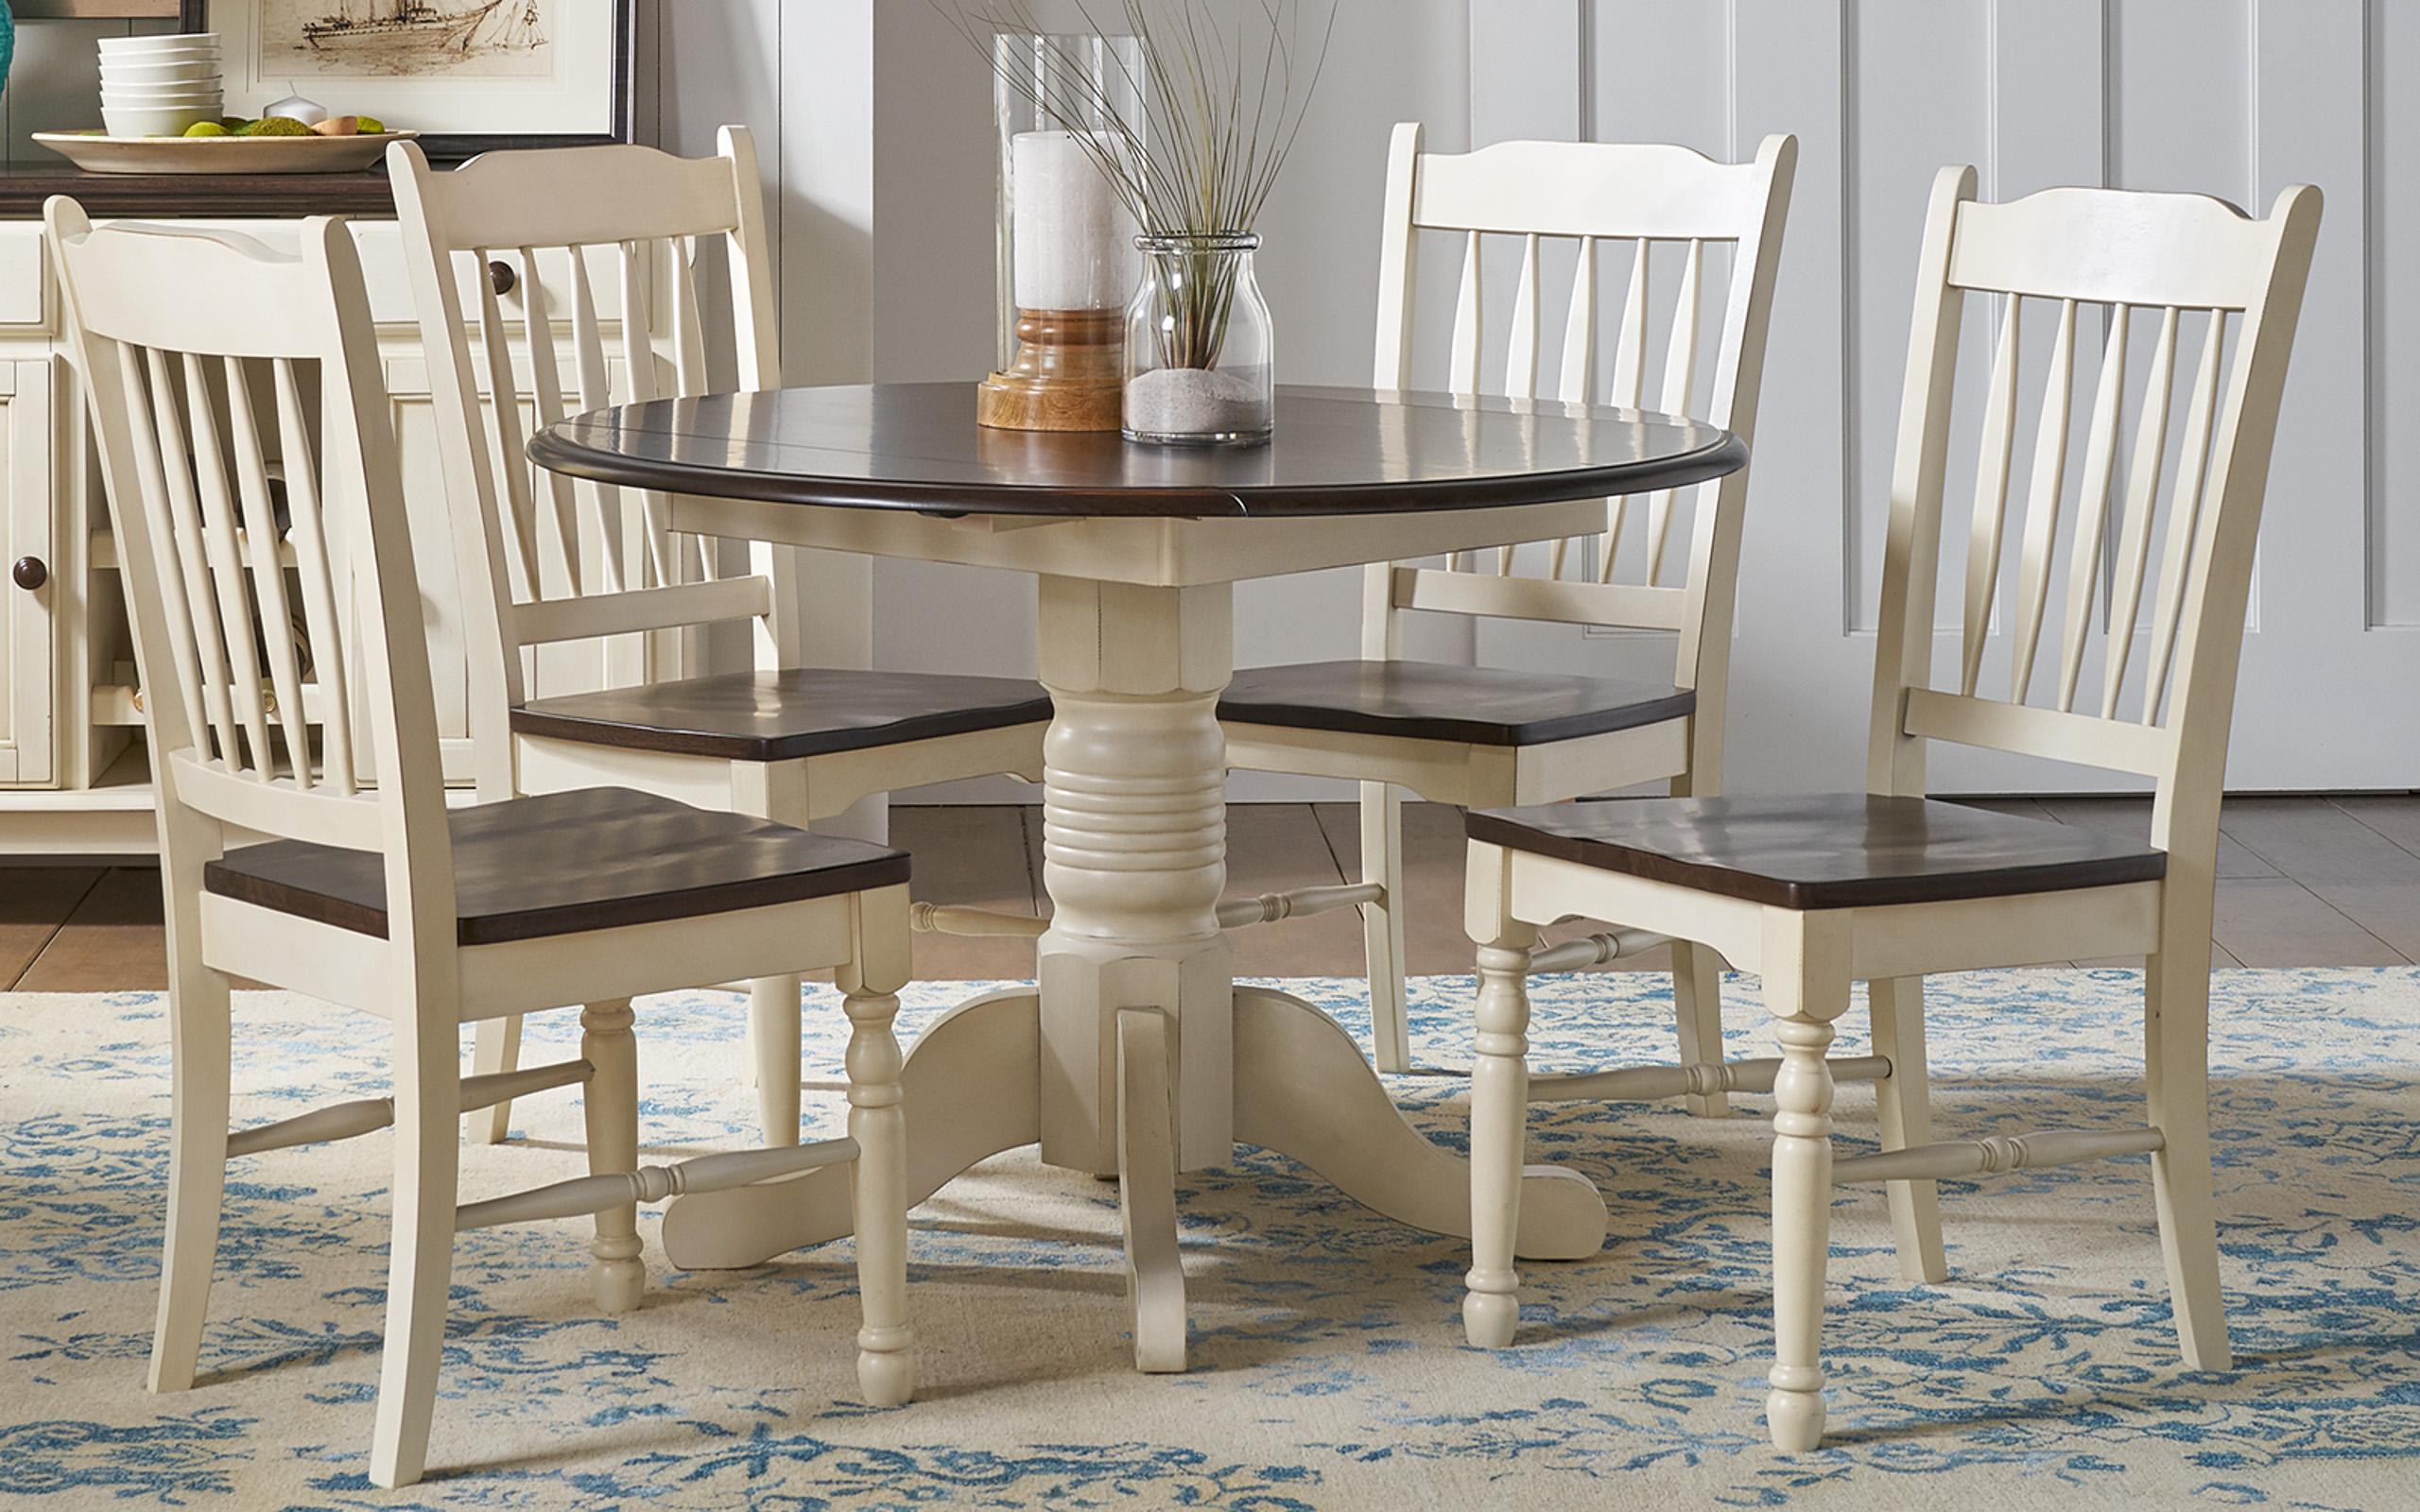 Rustic Dining Side Chair British Isles CO BRICO267K-Set-2 in Brown, White 